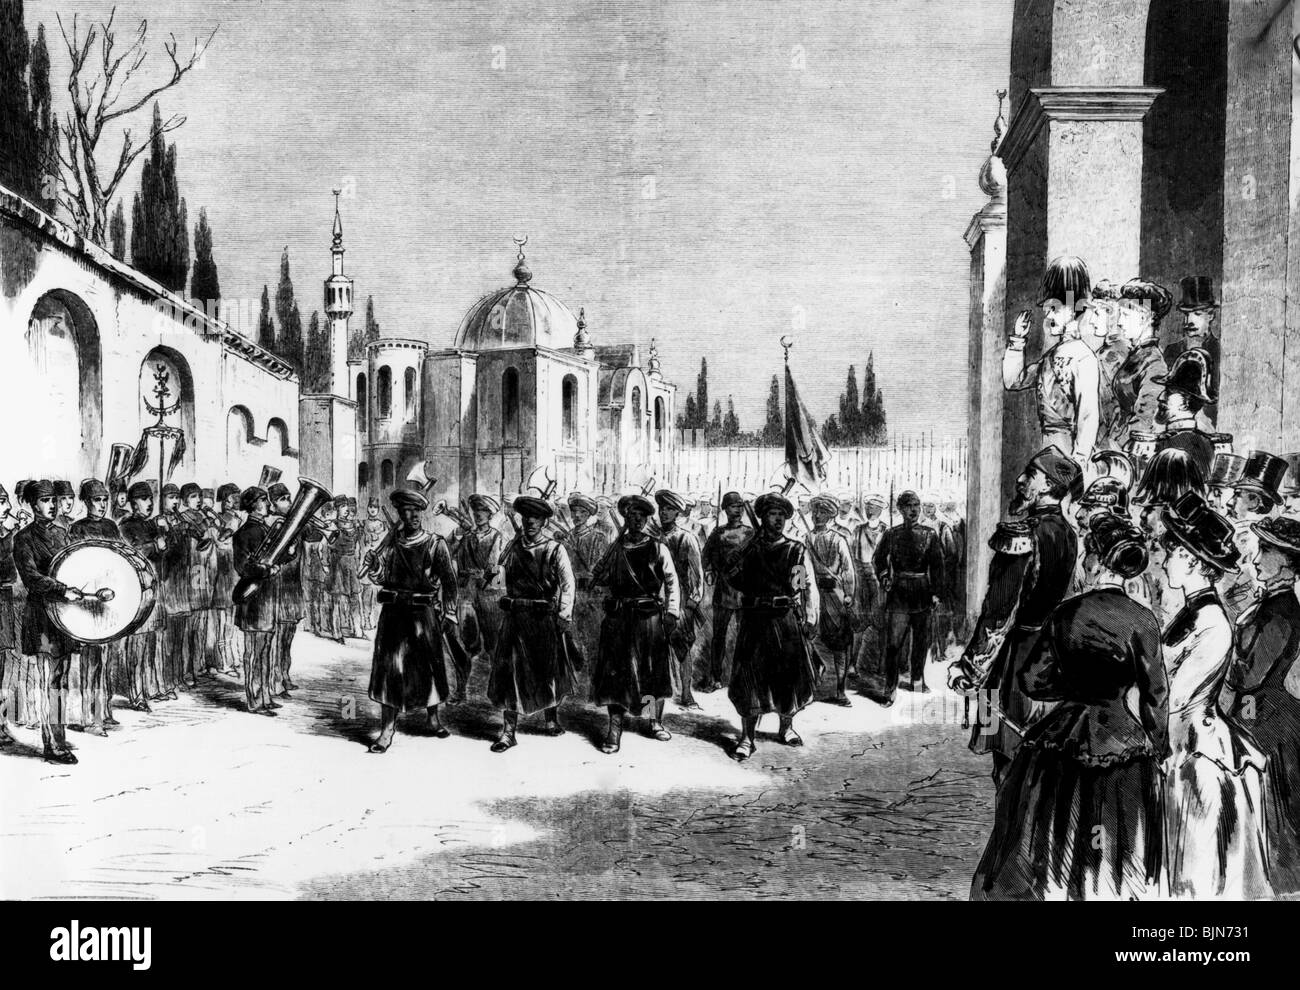 Rudolf, 21.8.1858 - 30.1.1889, Crown Prince of Austria-Hungary, journey to the Orient 1884, parade of the garrison of Constantinople, wood engraving after scetch by F. Schlegel, 1884, , Stock Photo